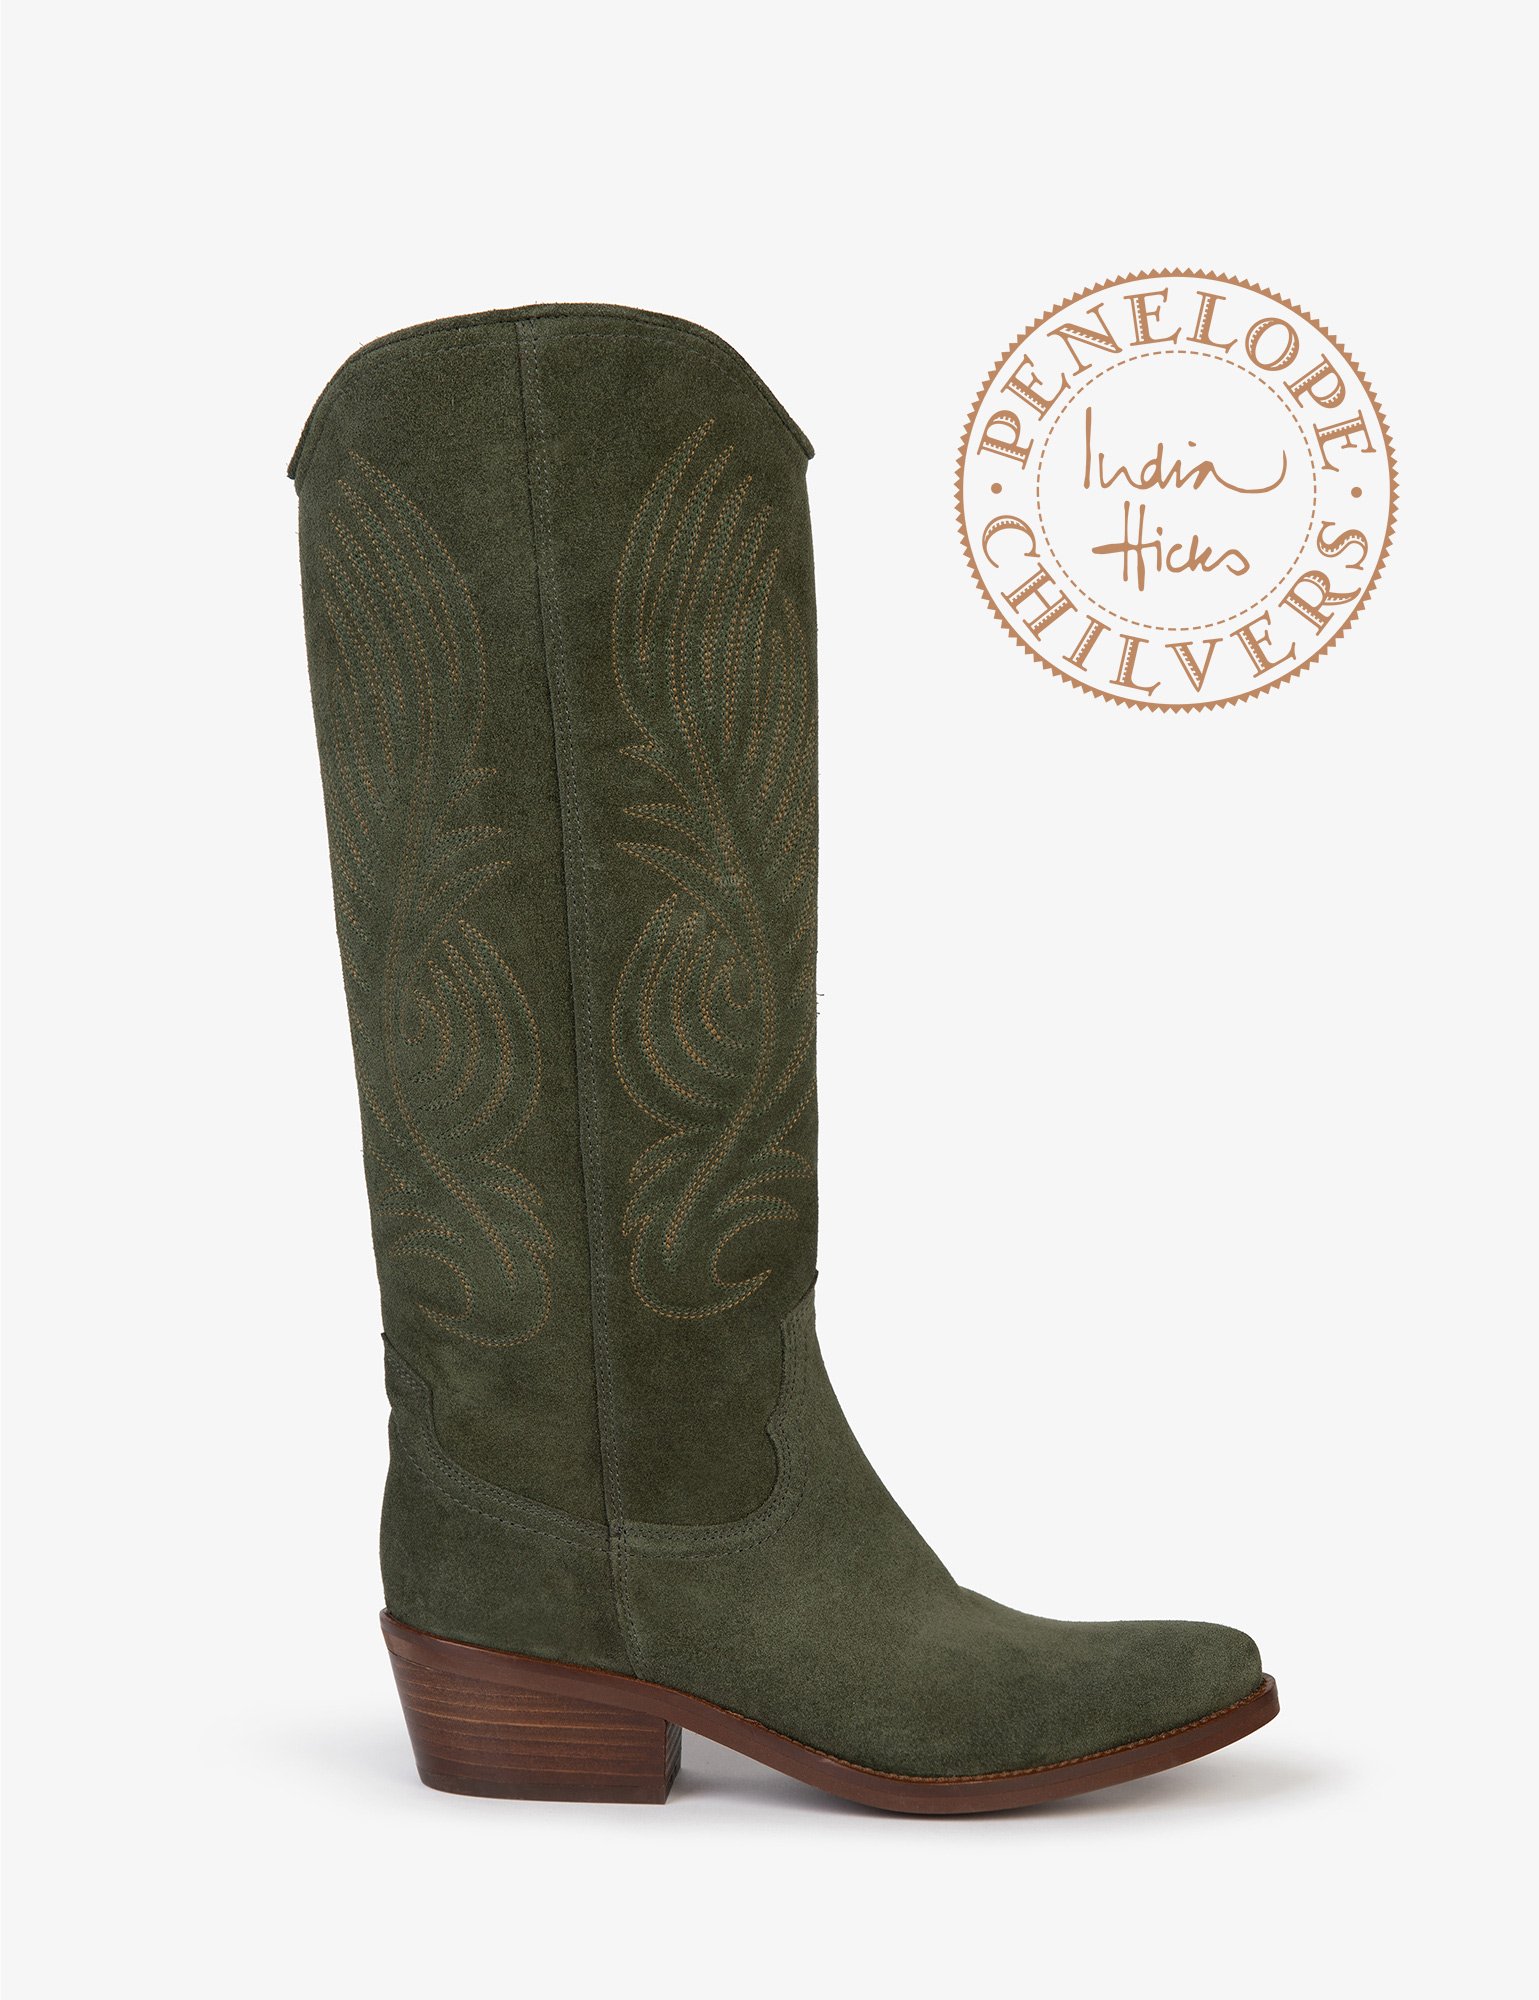 The Grove Suede Embroidered Boot - Hunter Green | Women's Boots ...